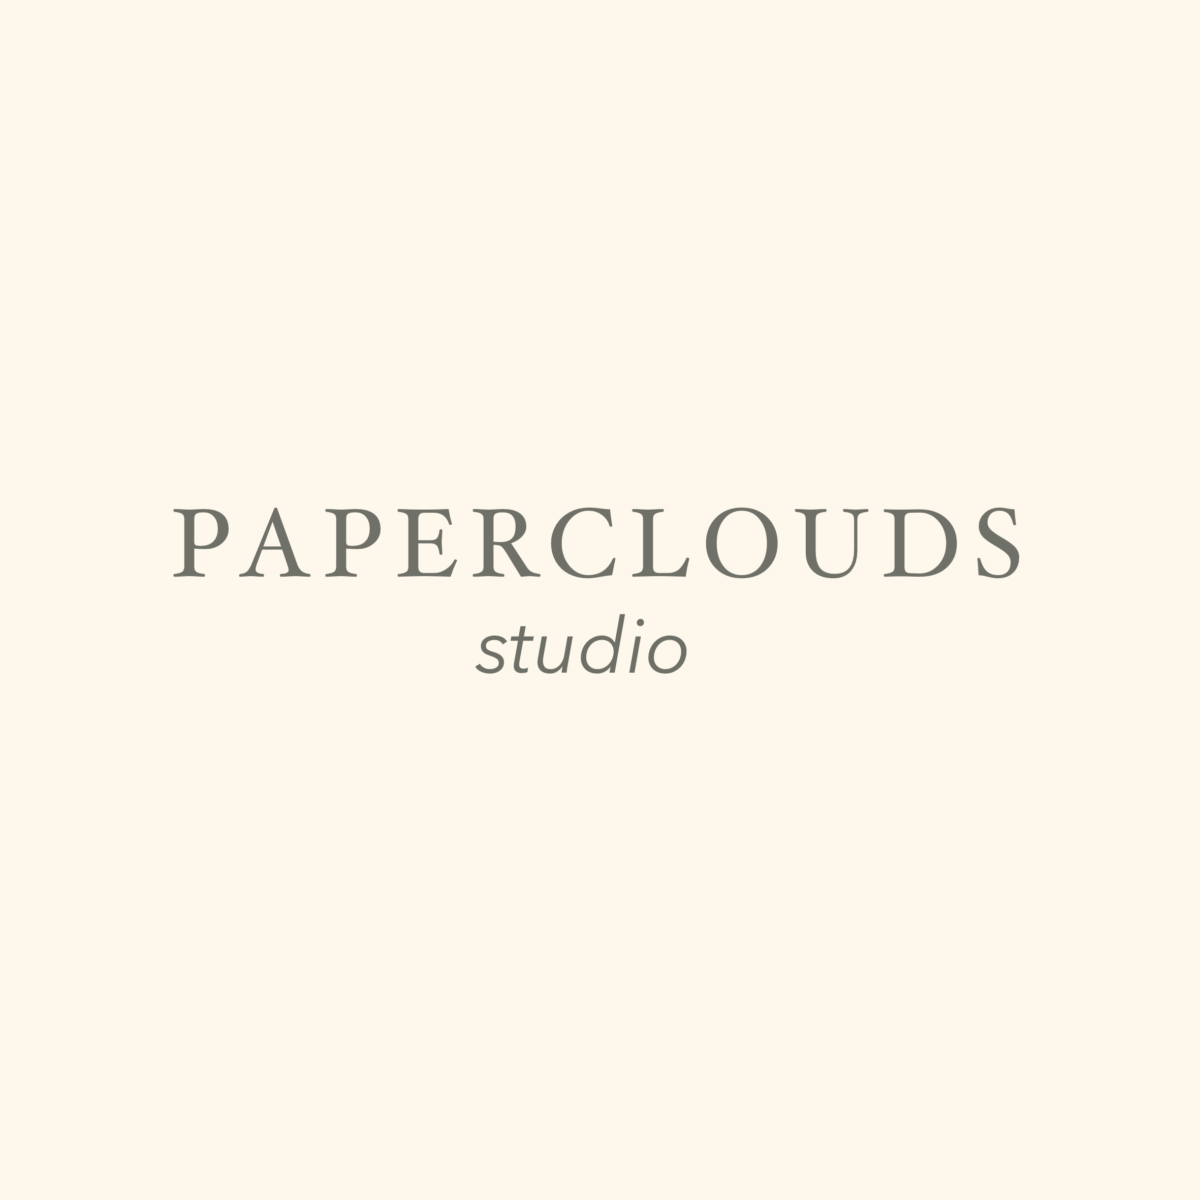 paperclouds studio